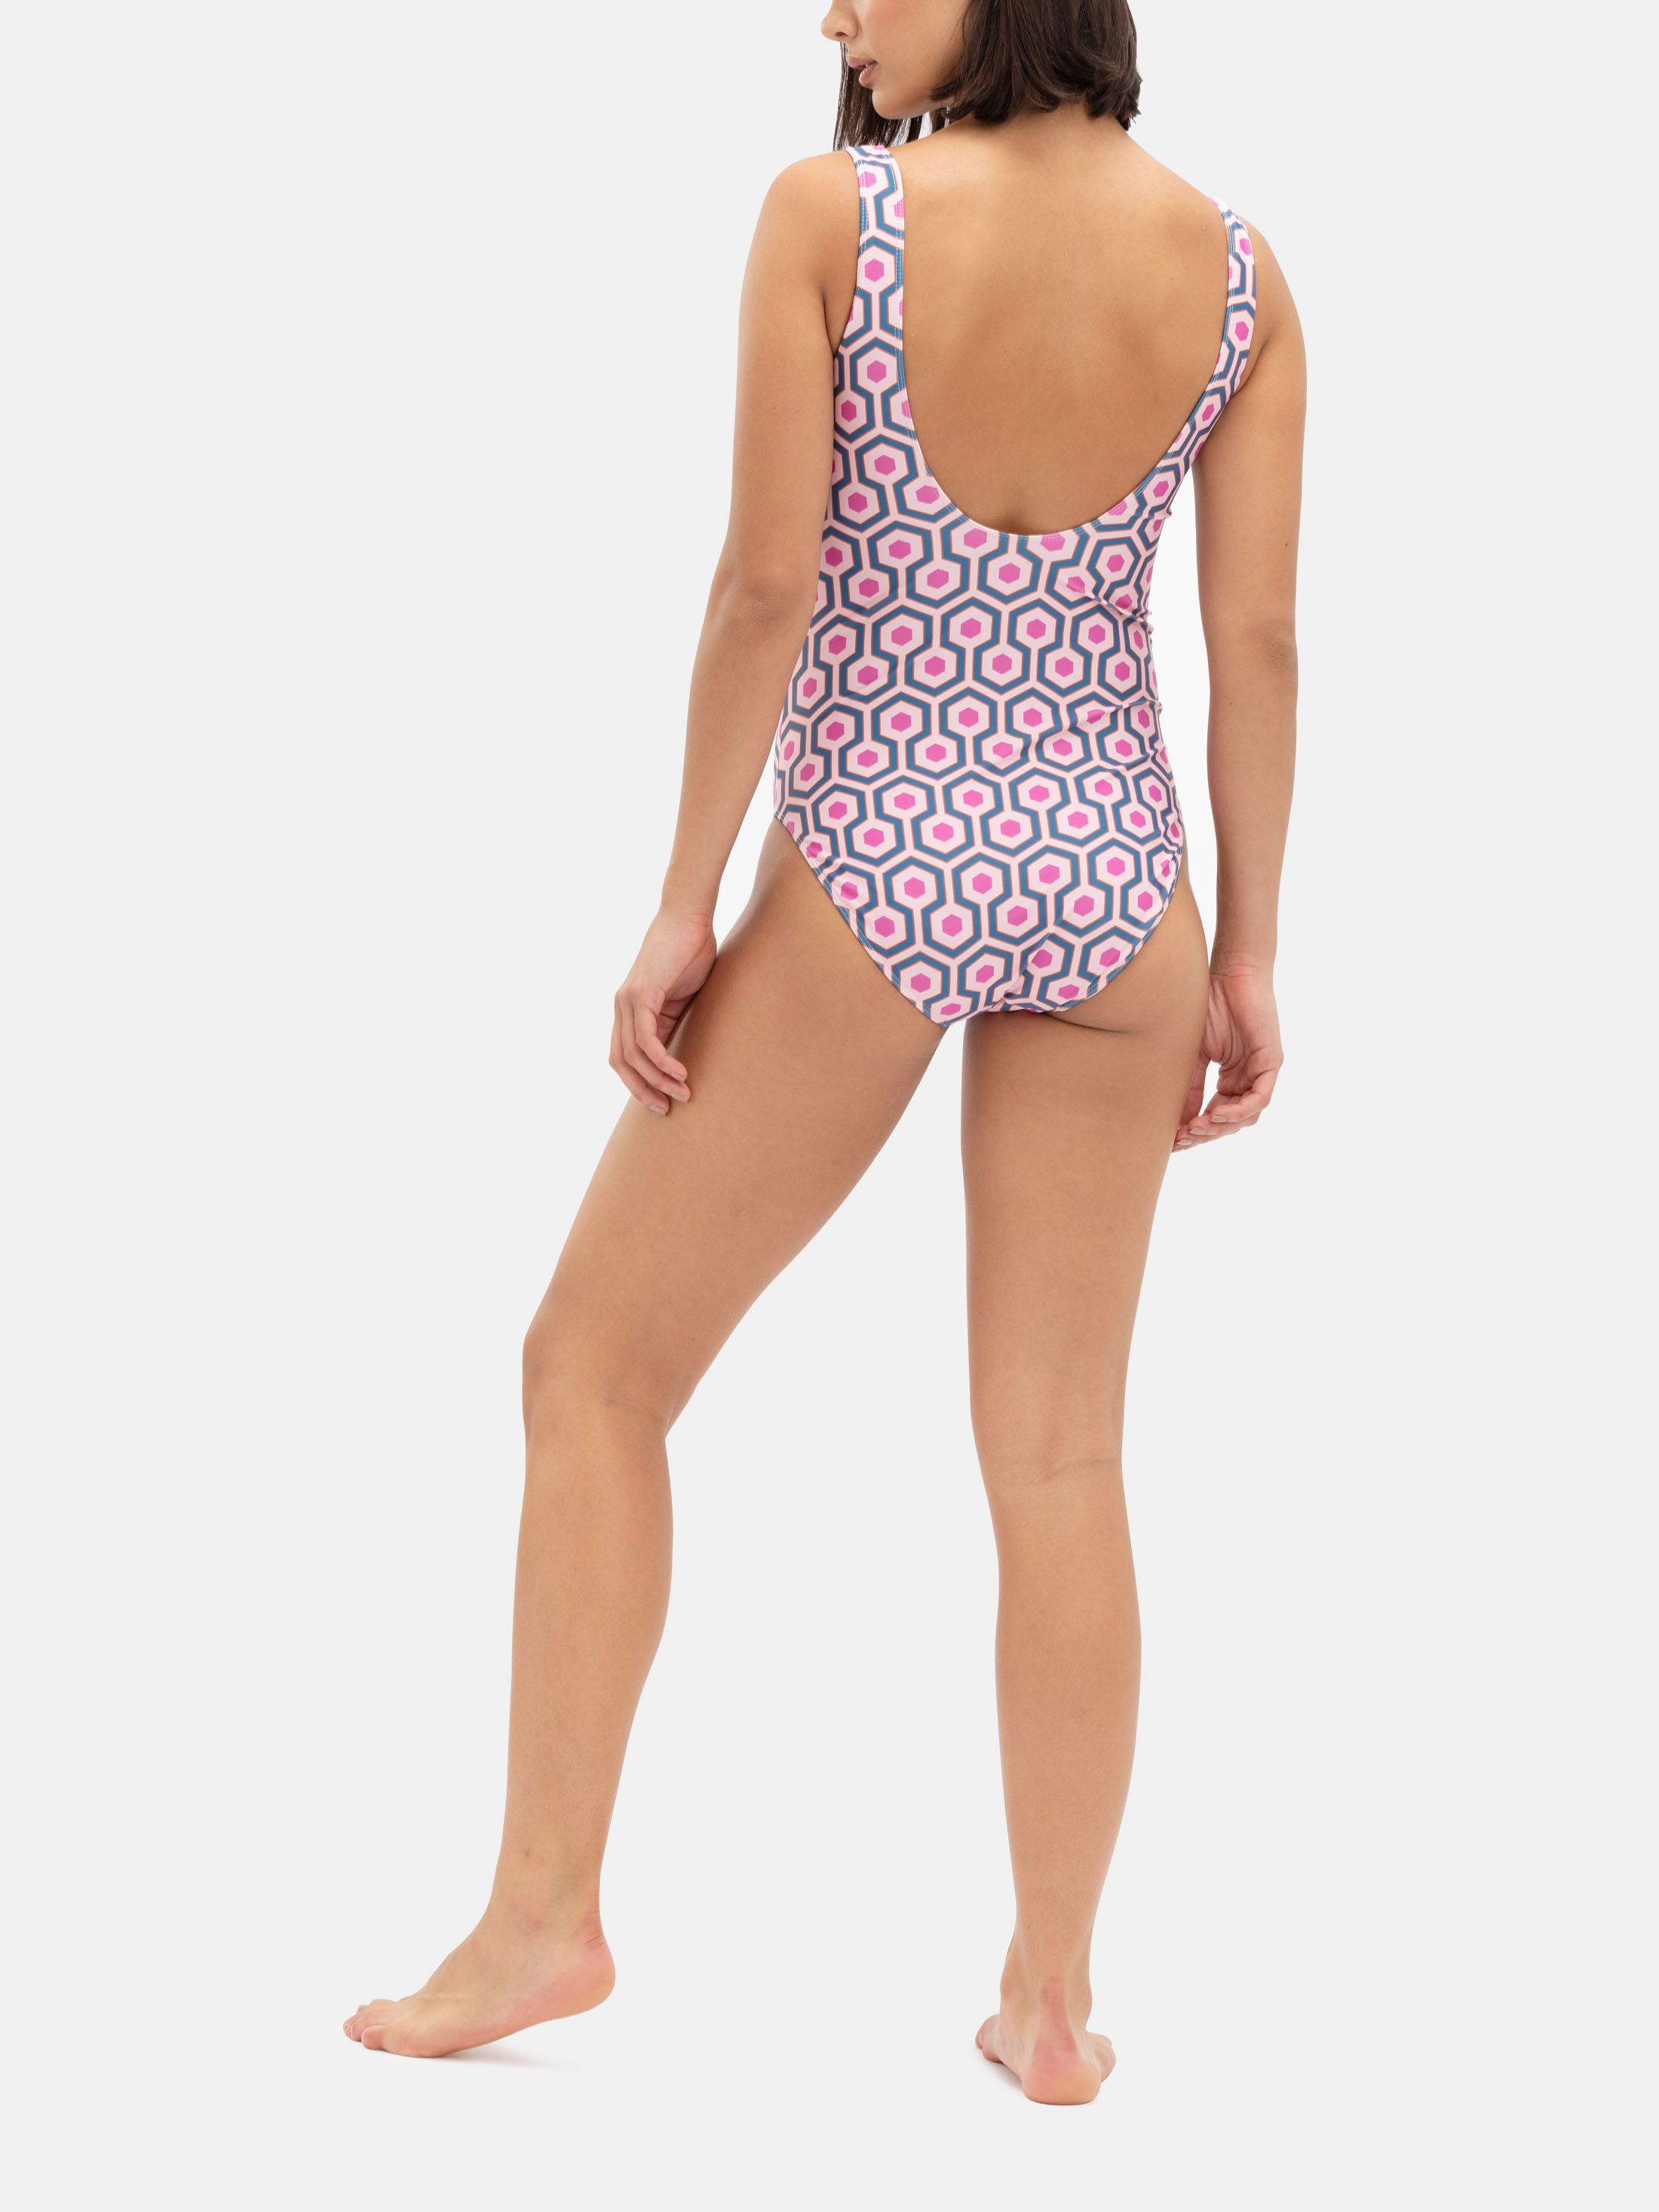 custom swimsuit with your design or logo